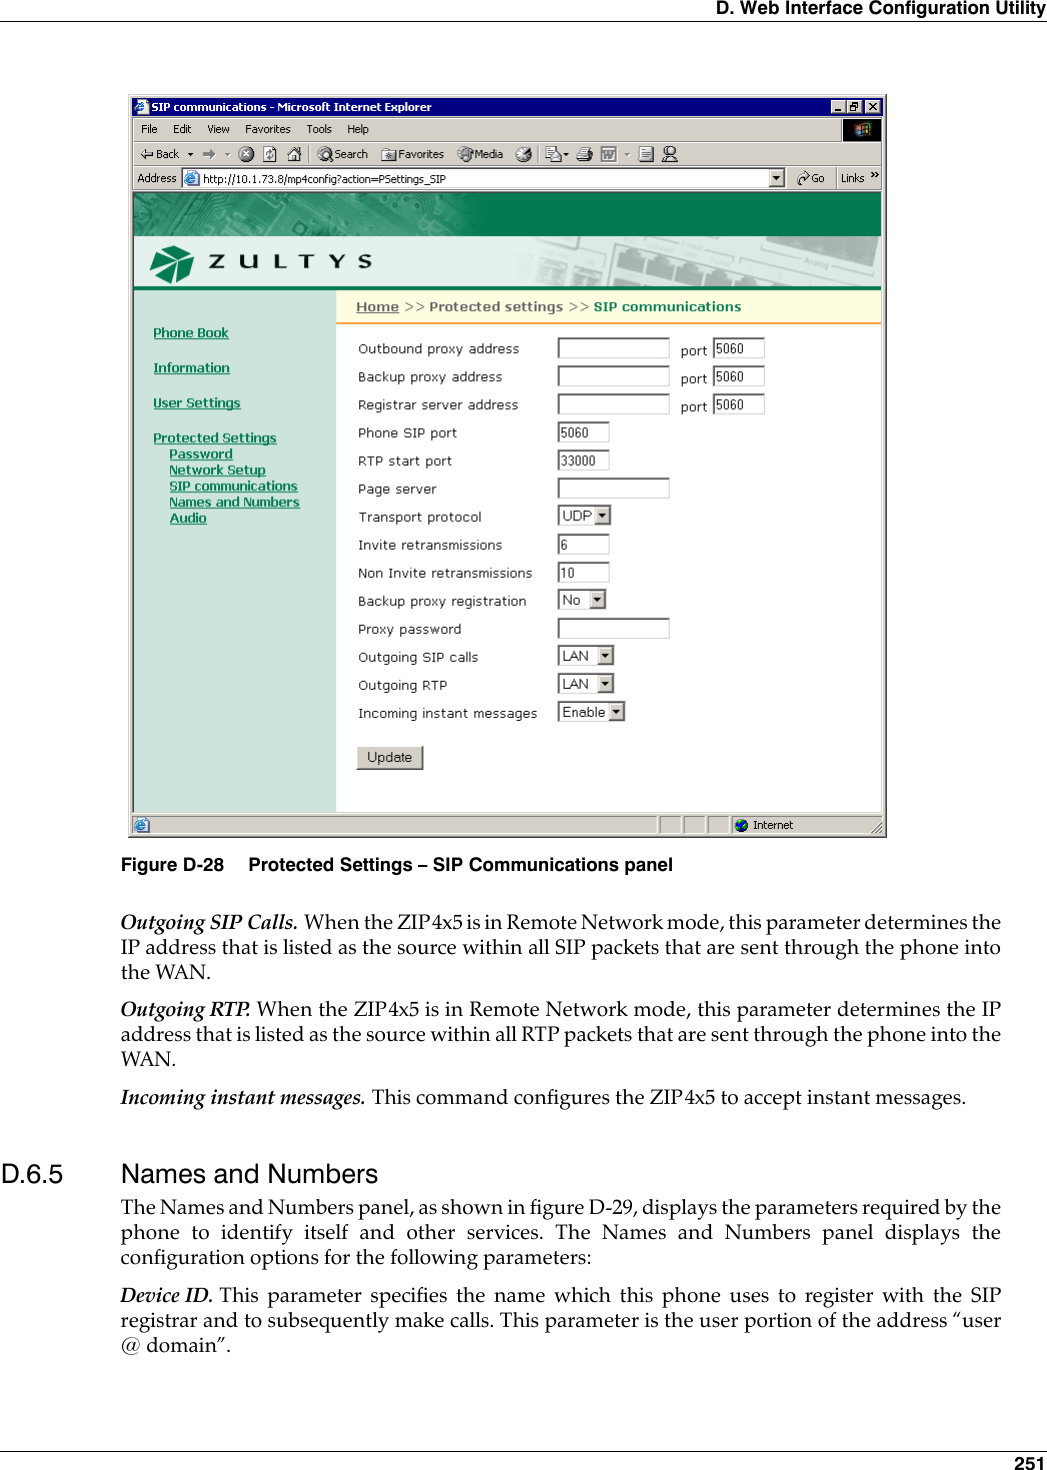 D. Web Interface Configuration Utility 251Outgoing SIP Calls. When the ZIP4x5 is in Remote Network mode, this parameter determines theIP address that is listed as the source within all SIP packets that are sent through the phone intothe WAN. Outgoing RTP. When the ZIP4x5 is in Remote Network mode, this parameter determines the IPaddress that is listed as the source within all RTP packets that are sent through the phone into theWAN.Incoming instant messages. This command configures the ZIP4x5 to accept instant messages.D.6.5 Names and NumbersThe Names and Numbers panel, as shown in figure D-29, displays the parameters required by thephone to identify itself and other services. The Names and Numbers panel displays theconfiguration options for the following parameters:Device ID. This parameter specifies the name which this phone uses to register with the SIPregistrar and to subsequently make calls. This parameter is the user portion of the address “user@ domain”.Figure D-28 Protected Settings – SIP Communications panel